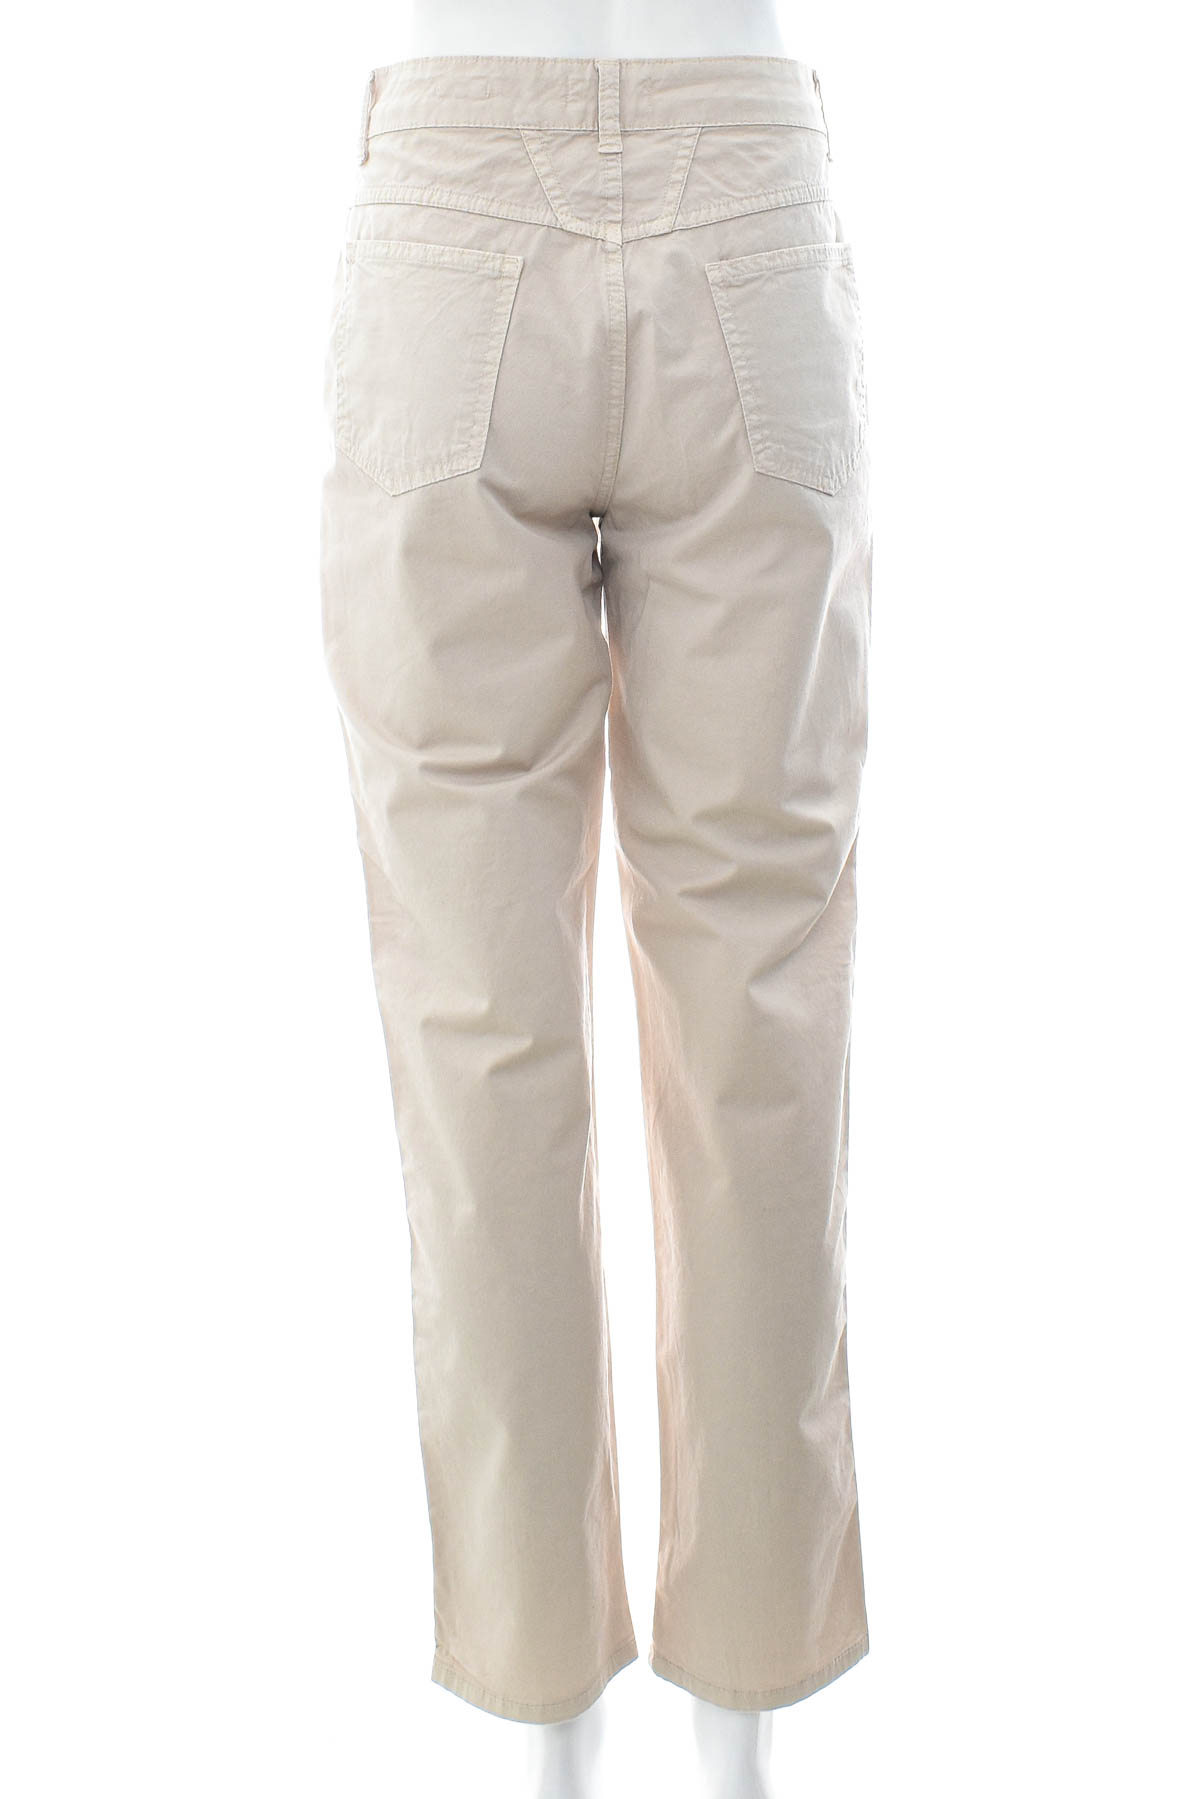 Women's trousers - CLOSED - 1